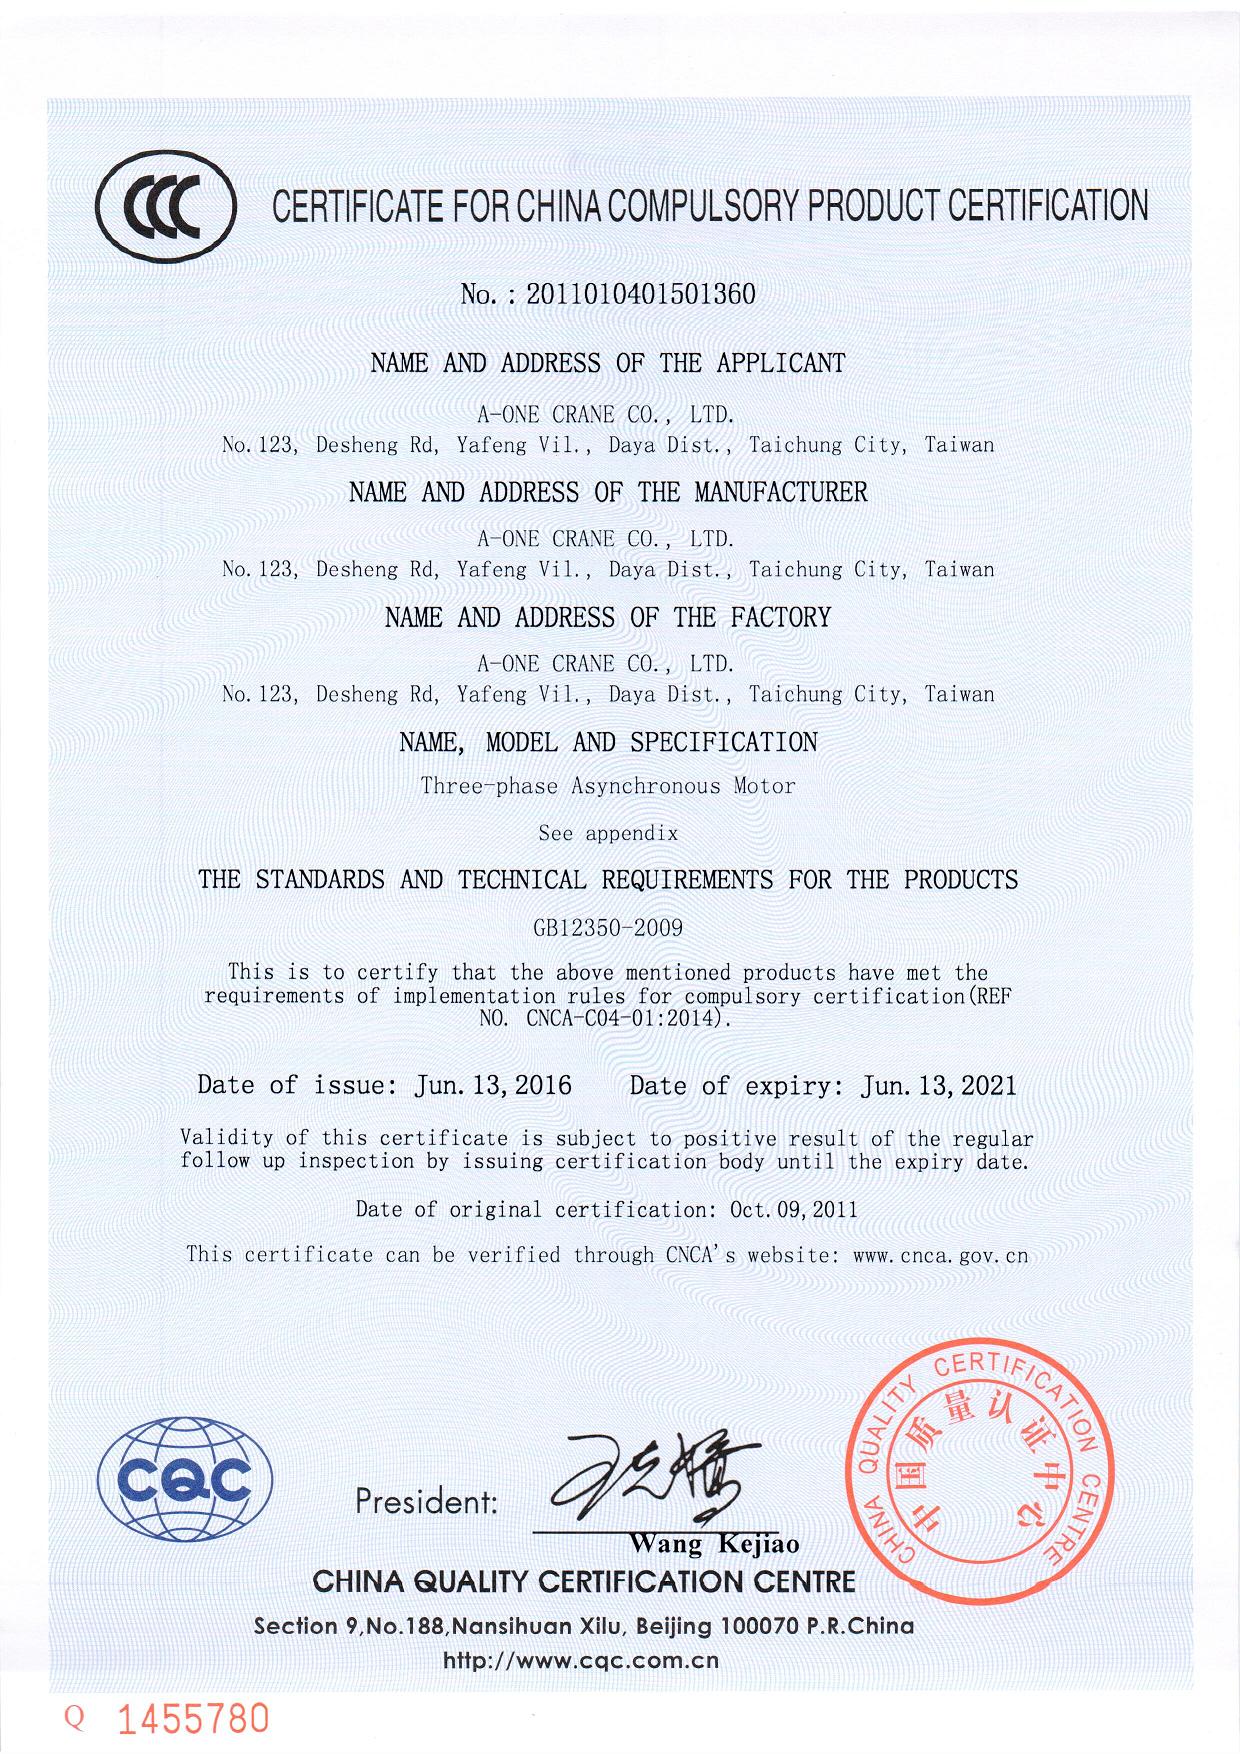 CCC CERTIFICATE FOR CHINA COMPULSORY PRODUCT CERTIFICATION ( CCC CERTIFICATE )